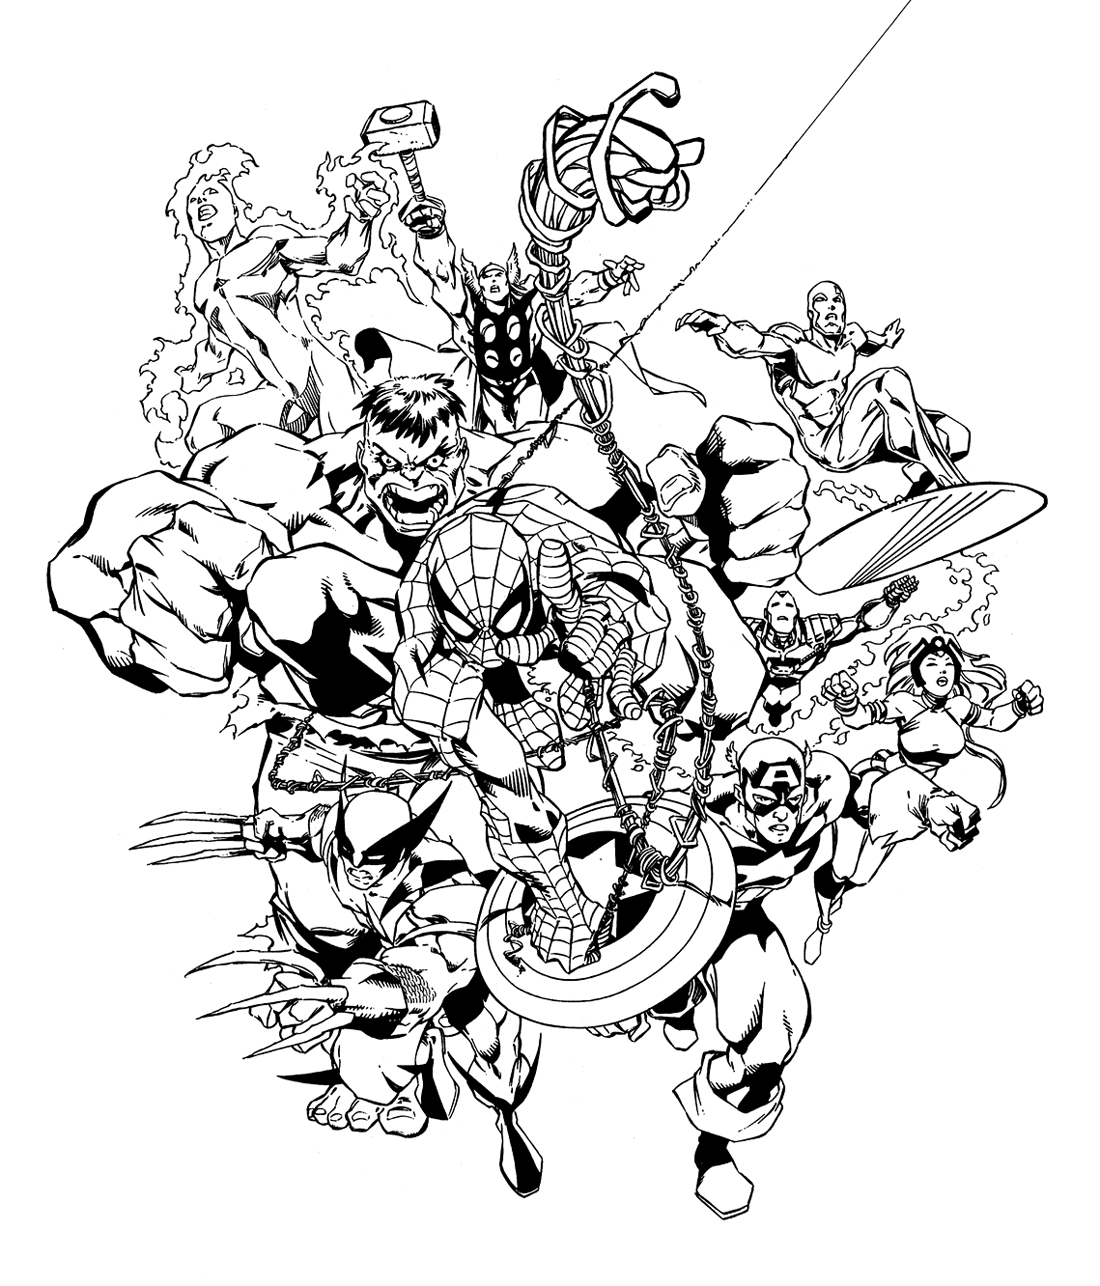 Free Avengers coloring pages to download - Avengers Kids Coloring Pages